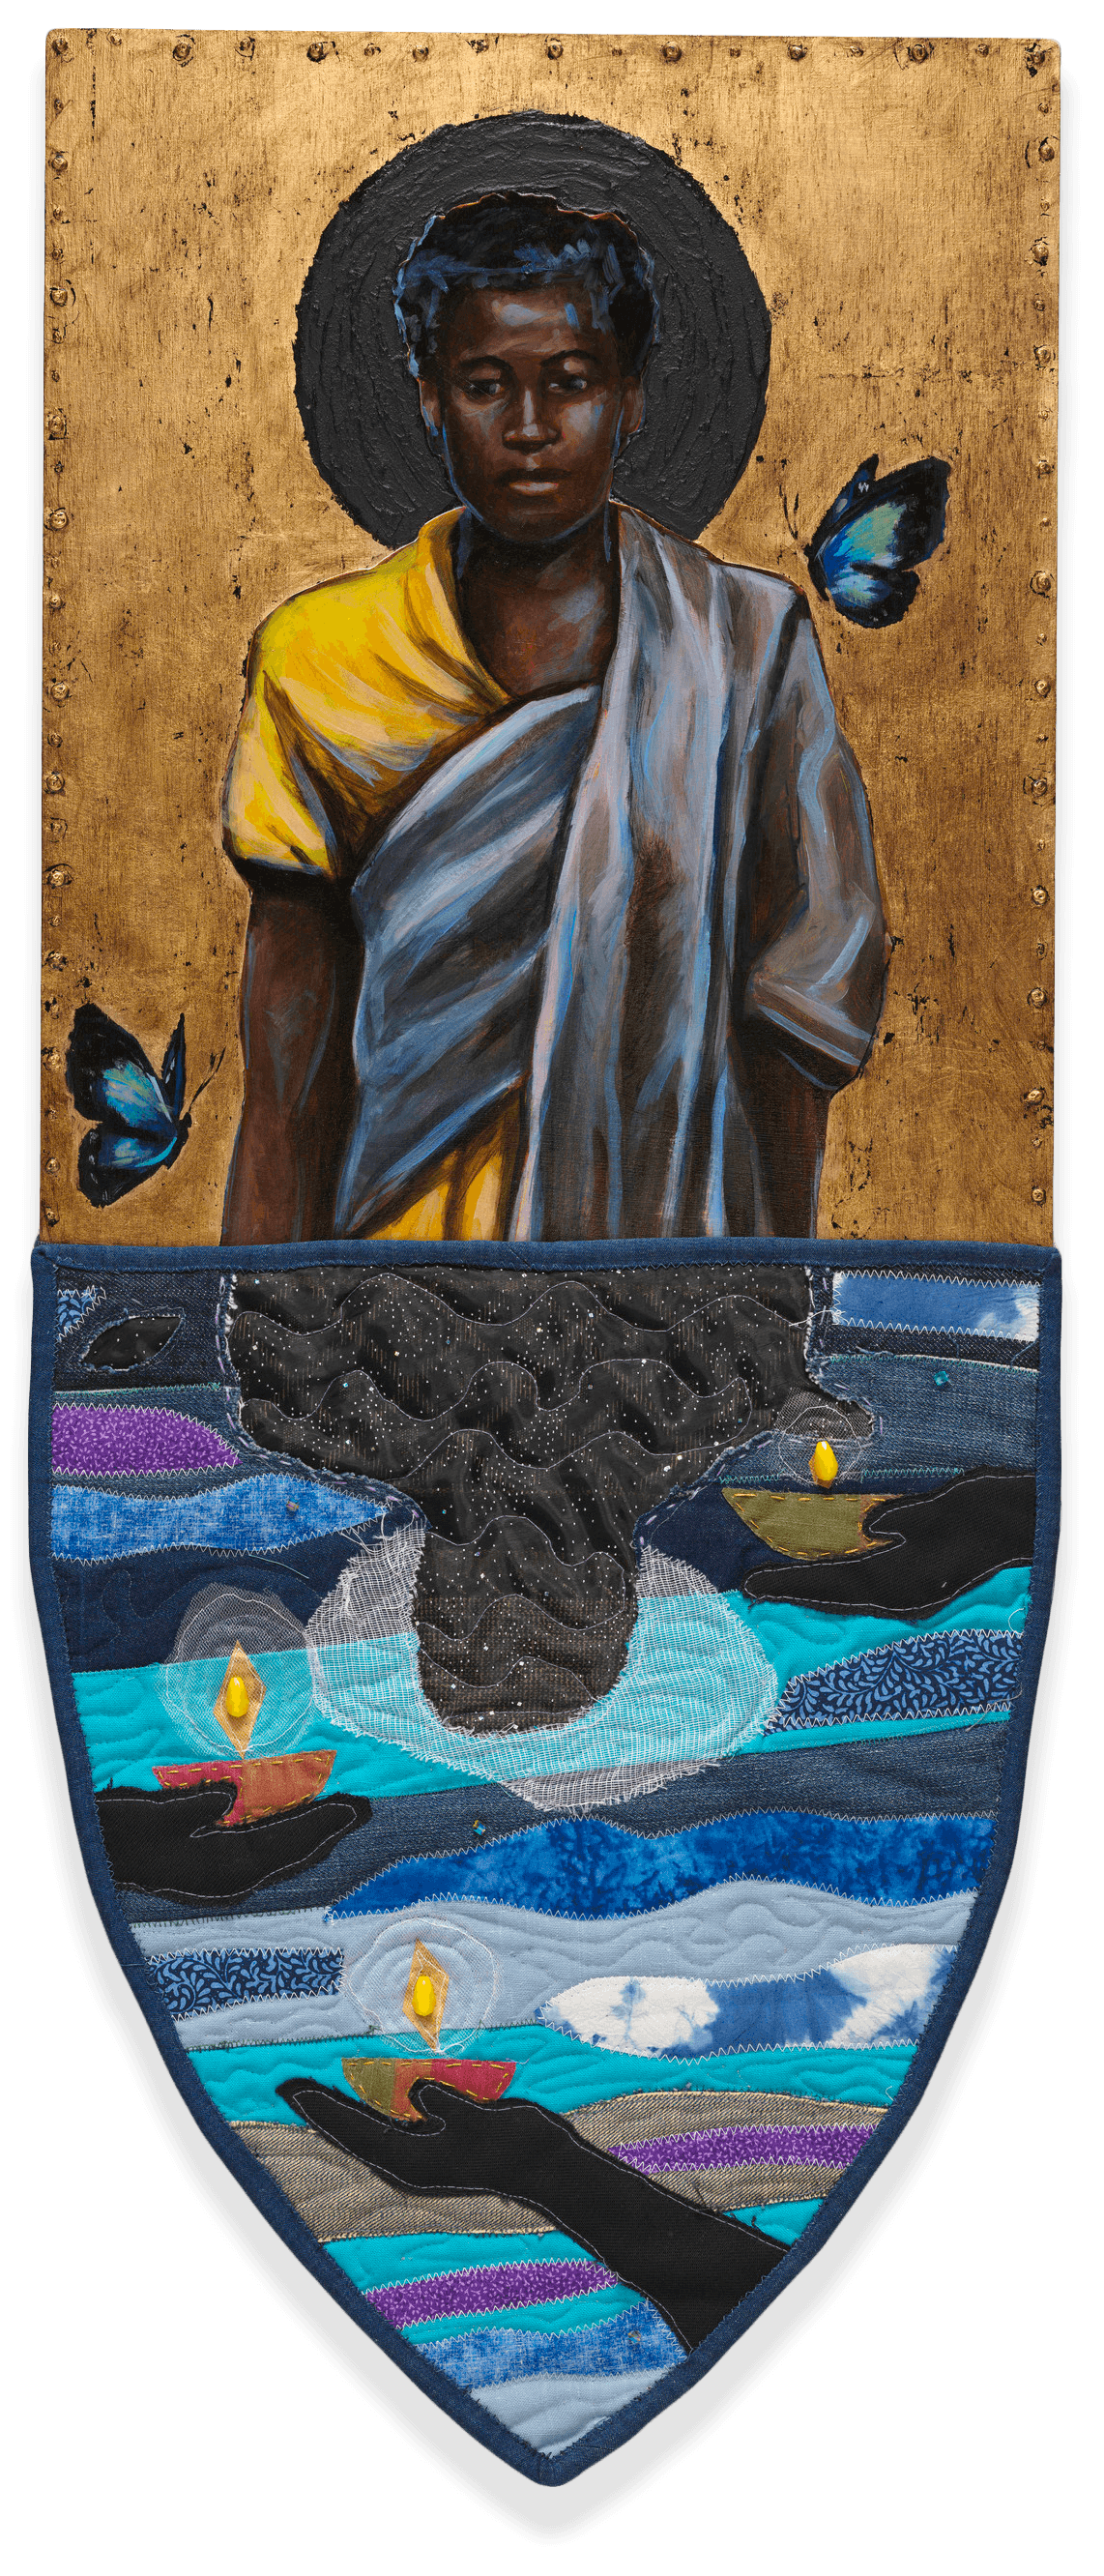 A mixed media piece of art by Stephen Towns that has a painting of a black woman looking slightly down above her reflection in the water.